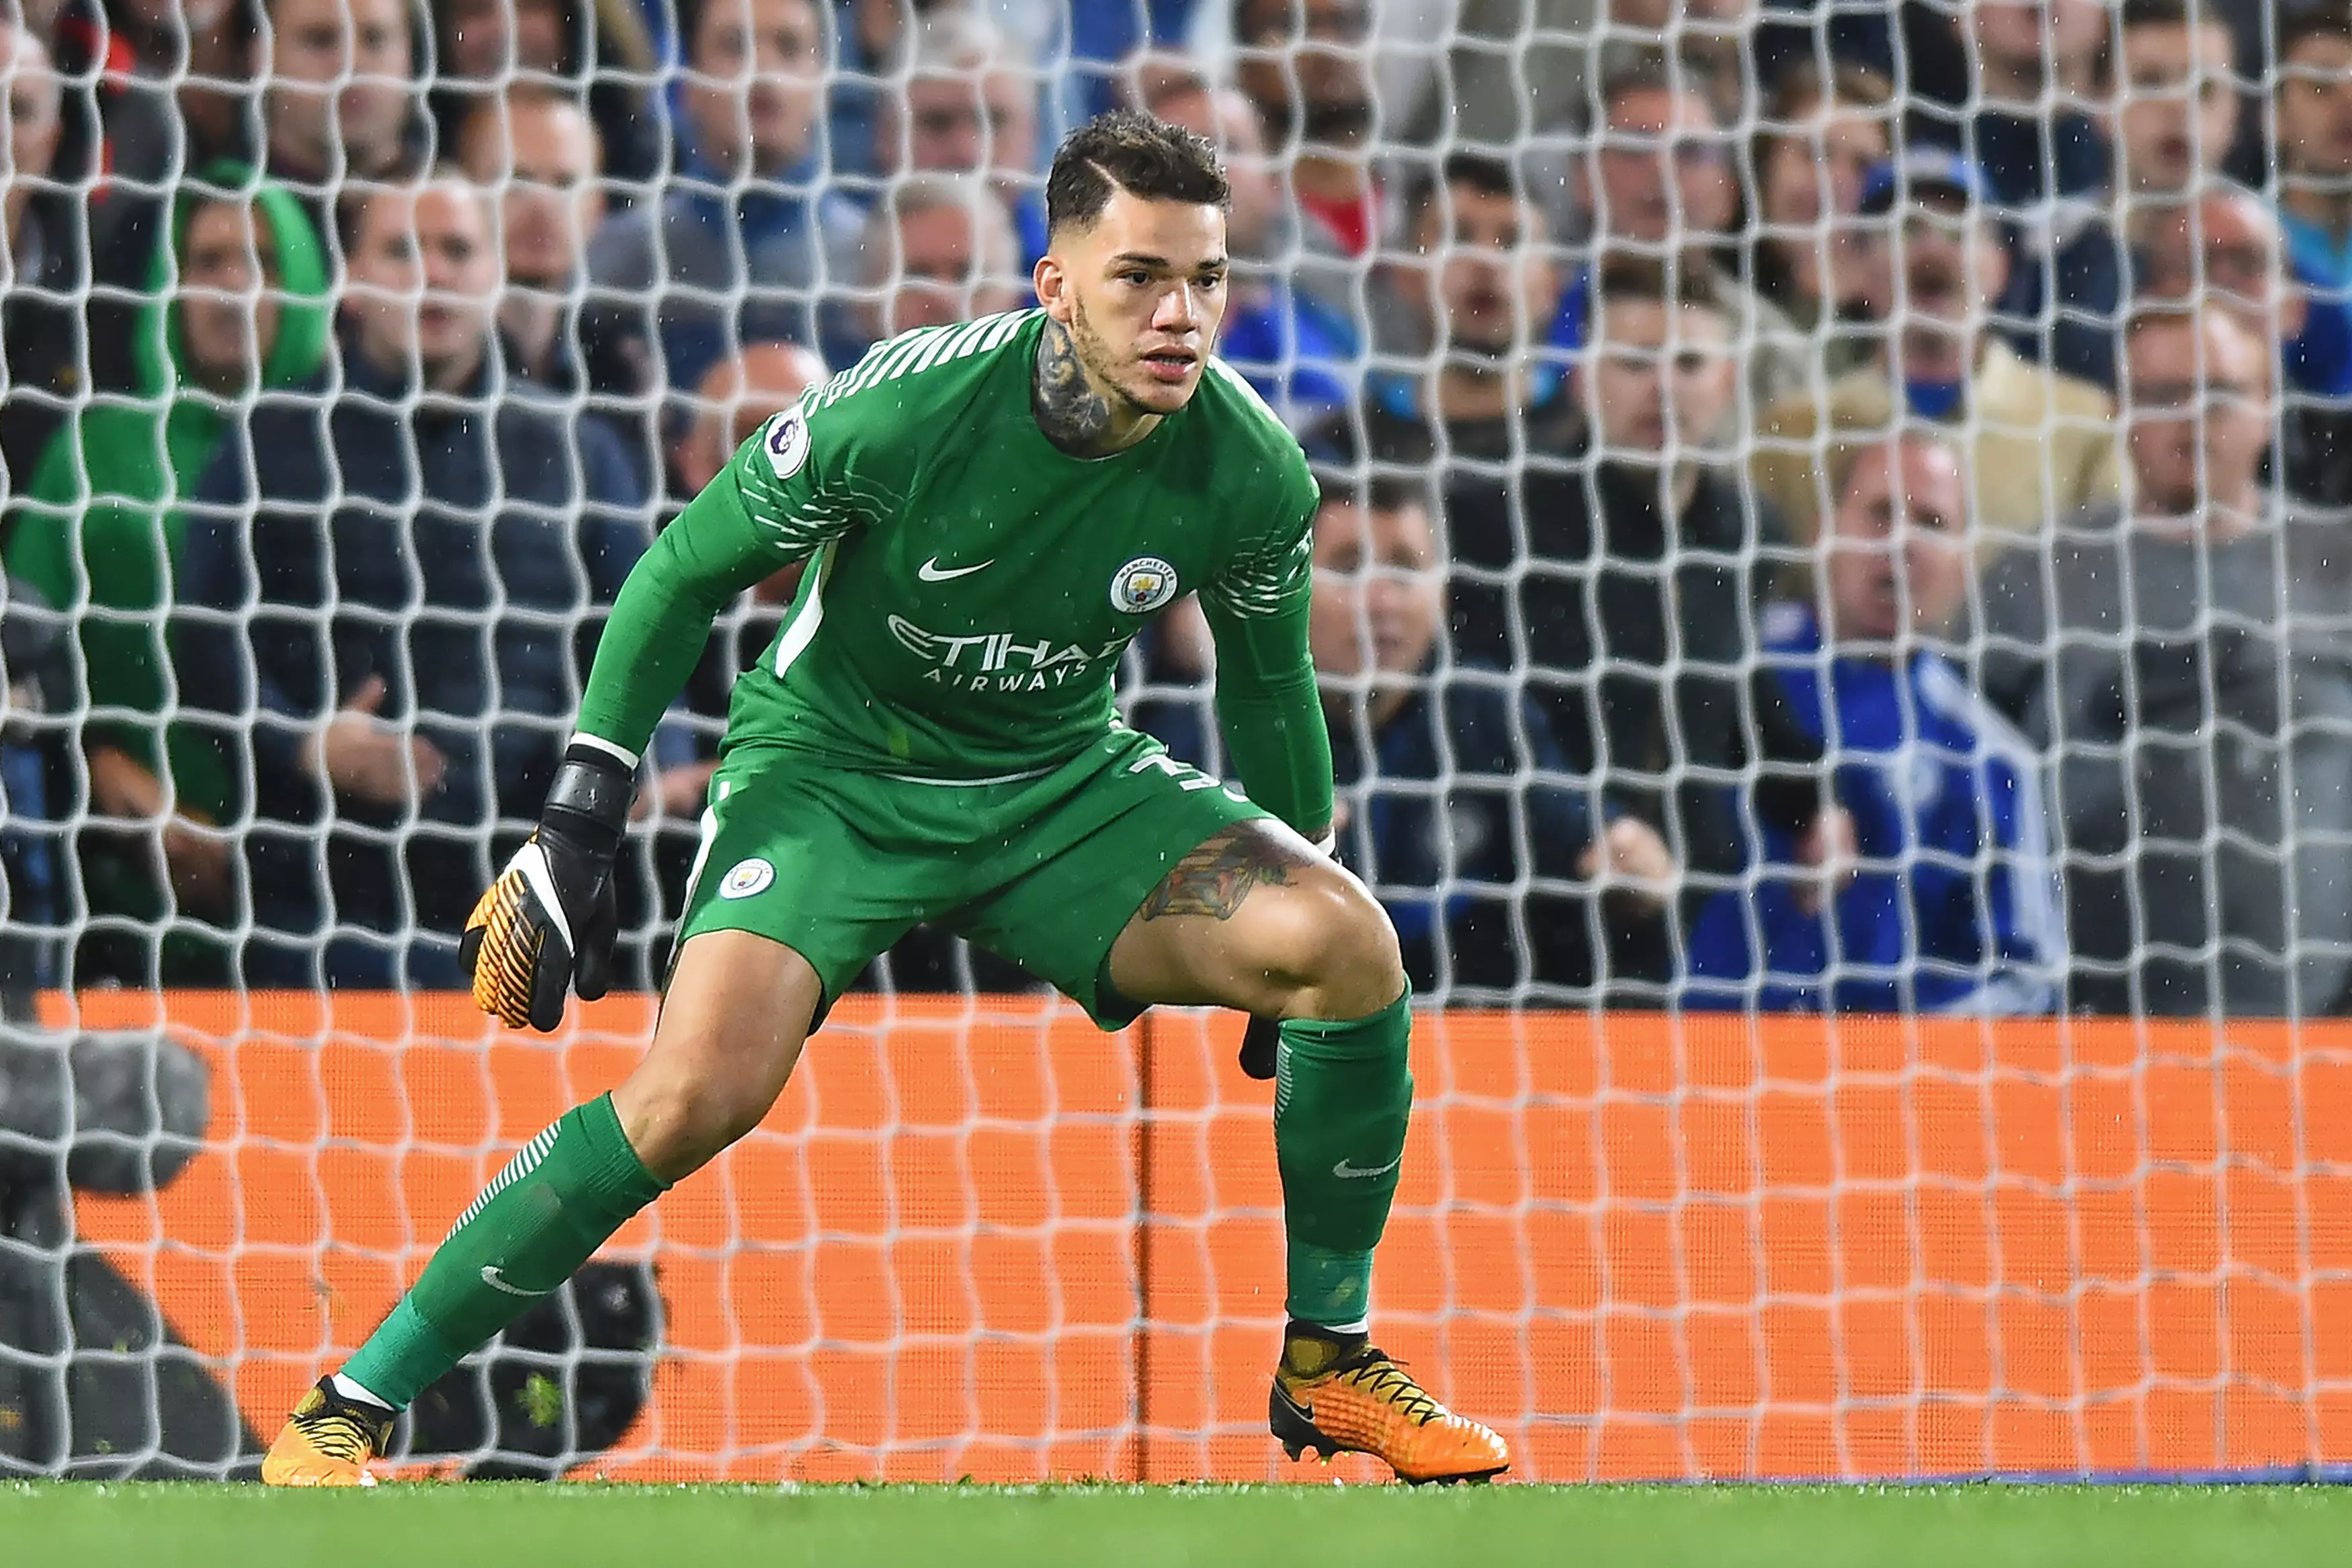 Ederson has also been impressing this season. Image: PA Images.